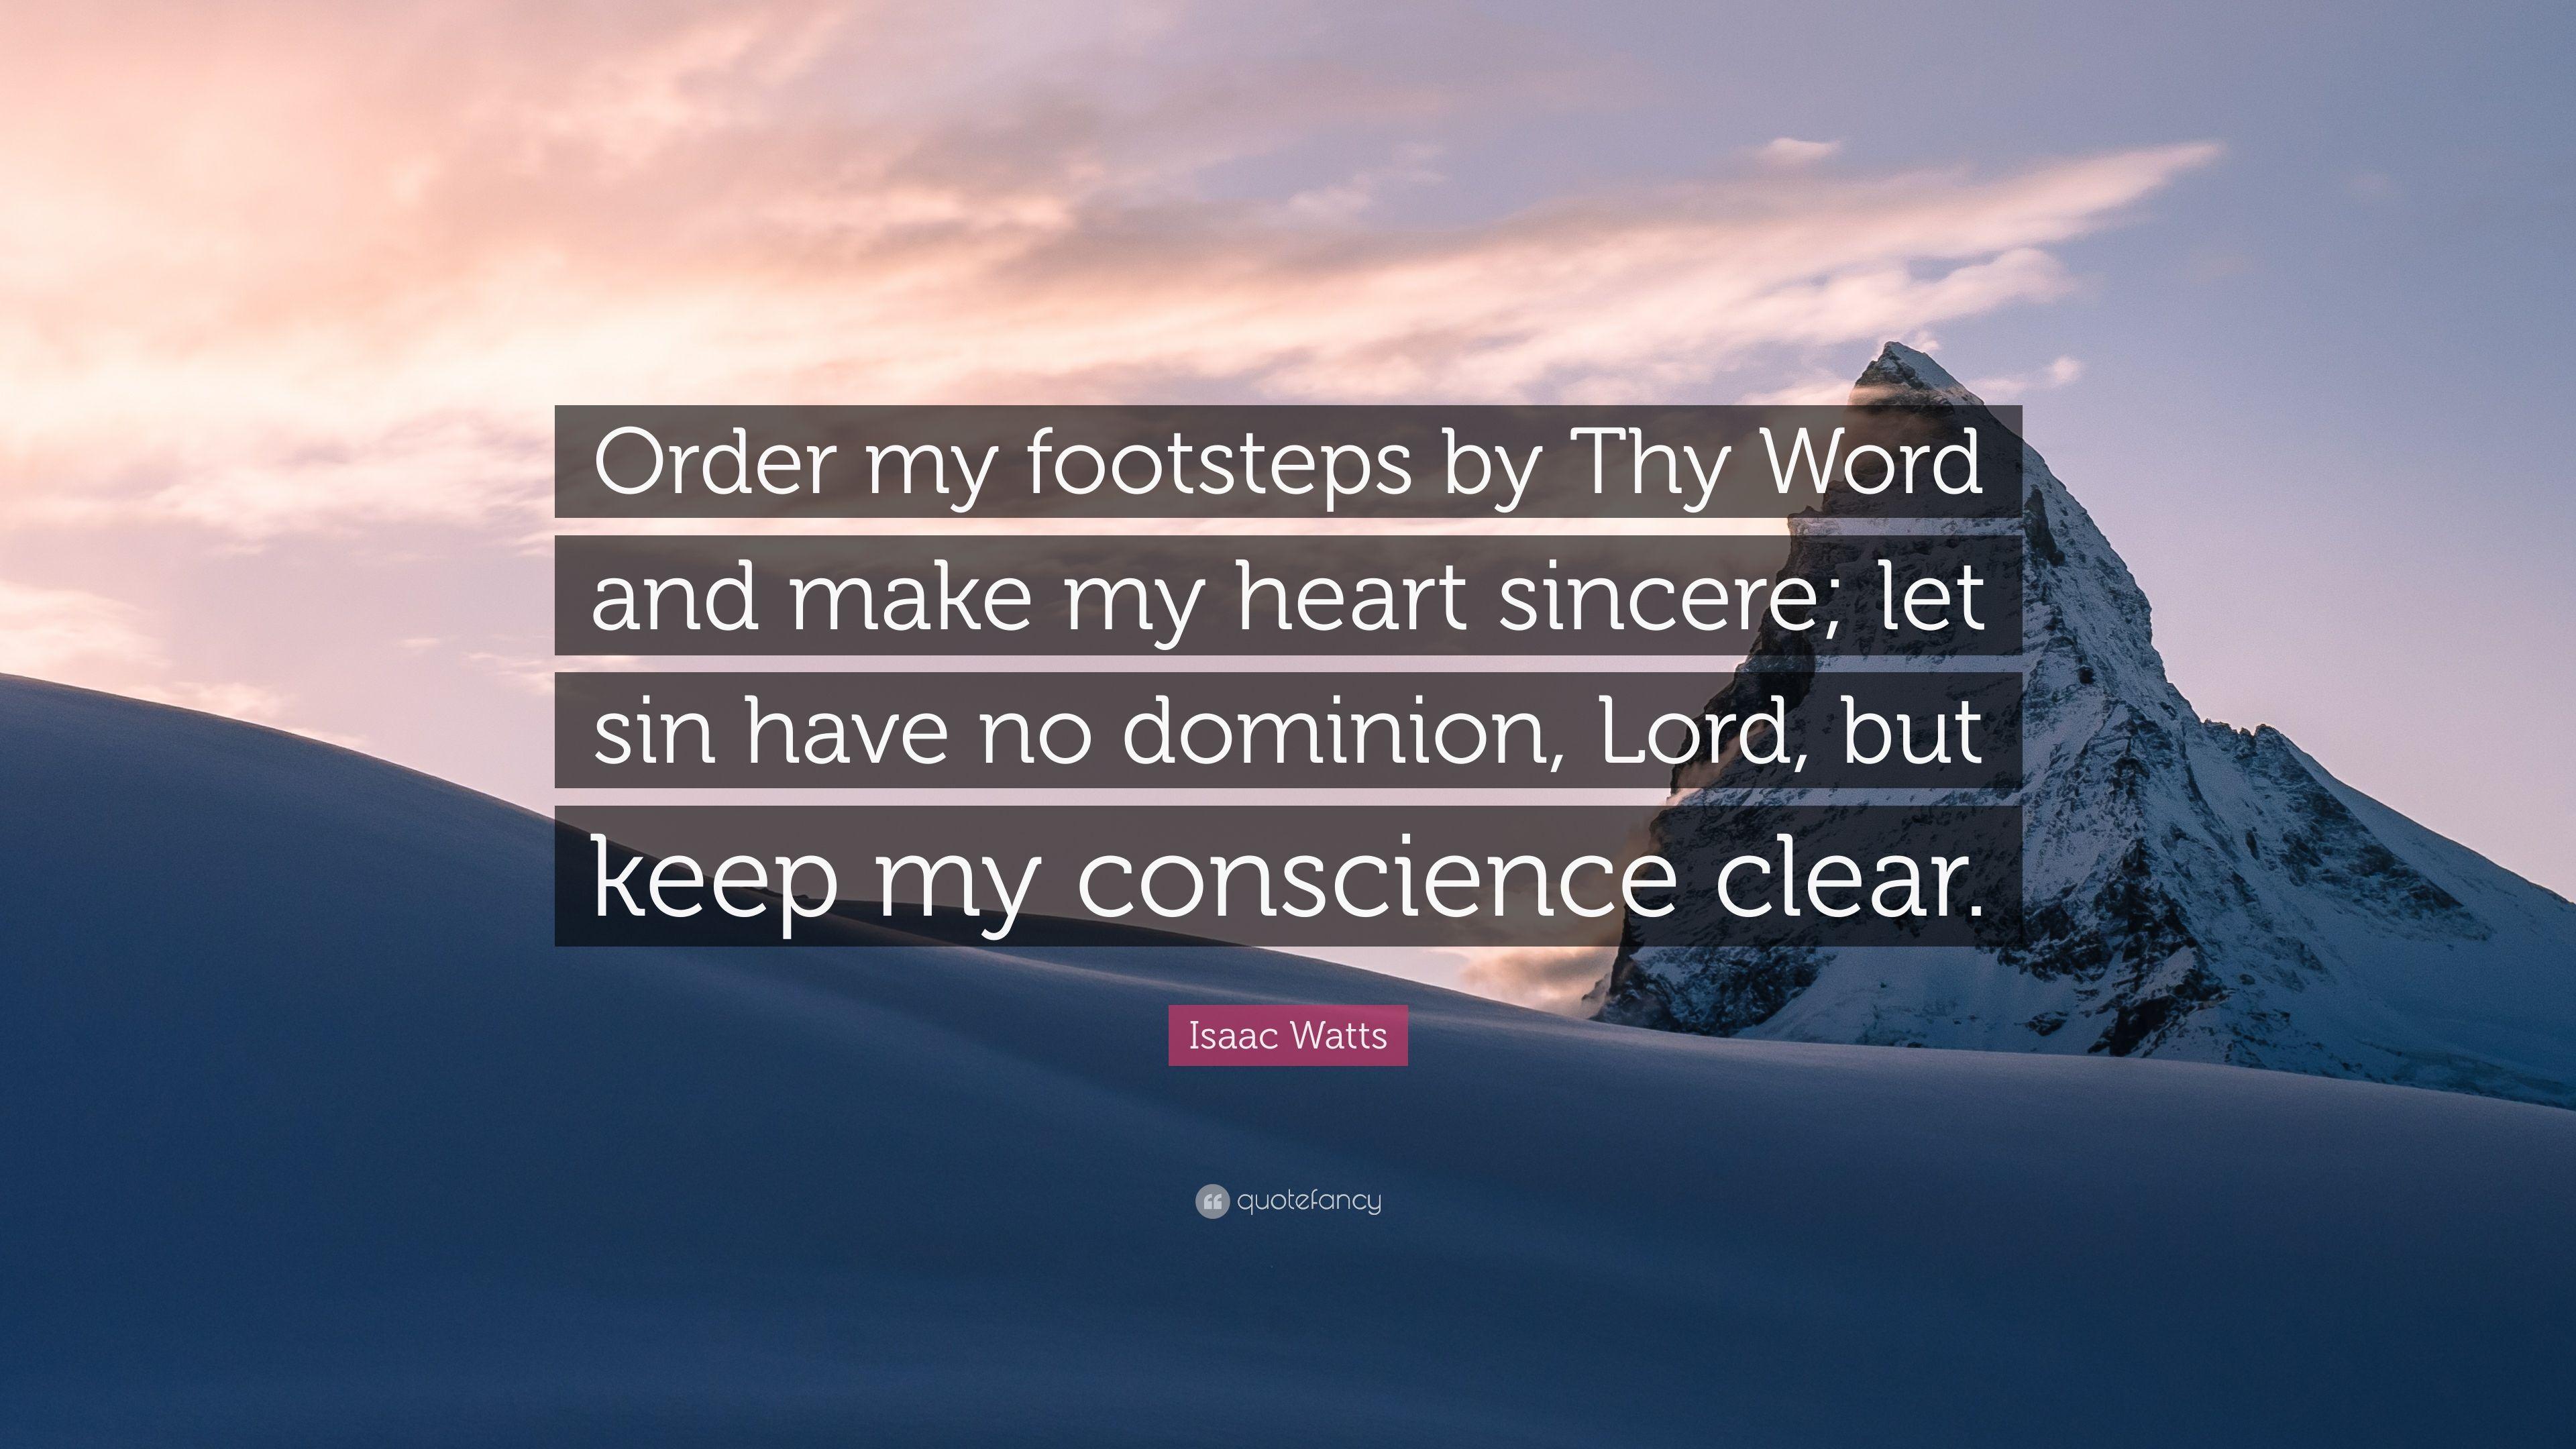 Isaac Watts Quote: “Order my footsteps by Thy Word and make